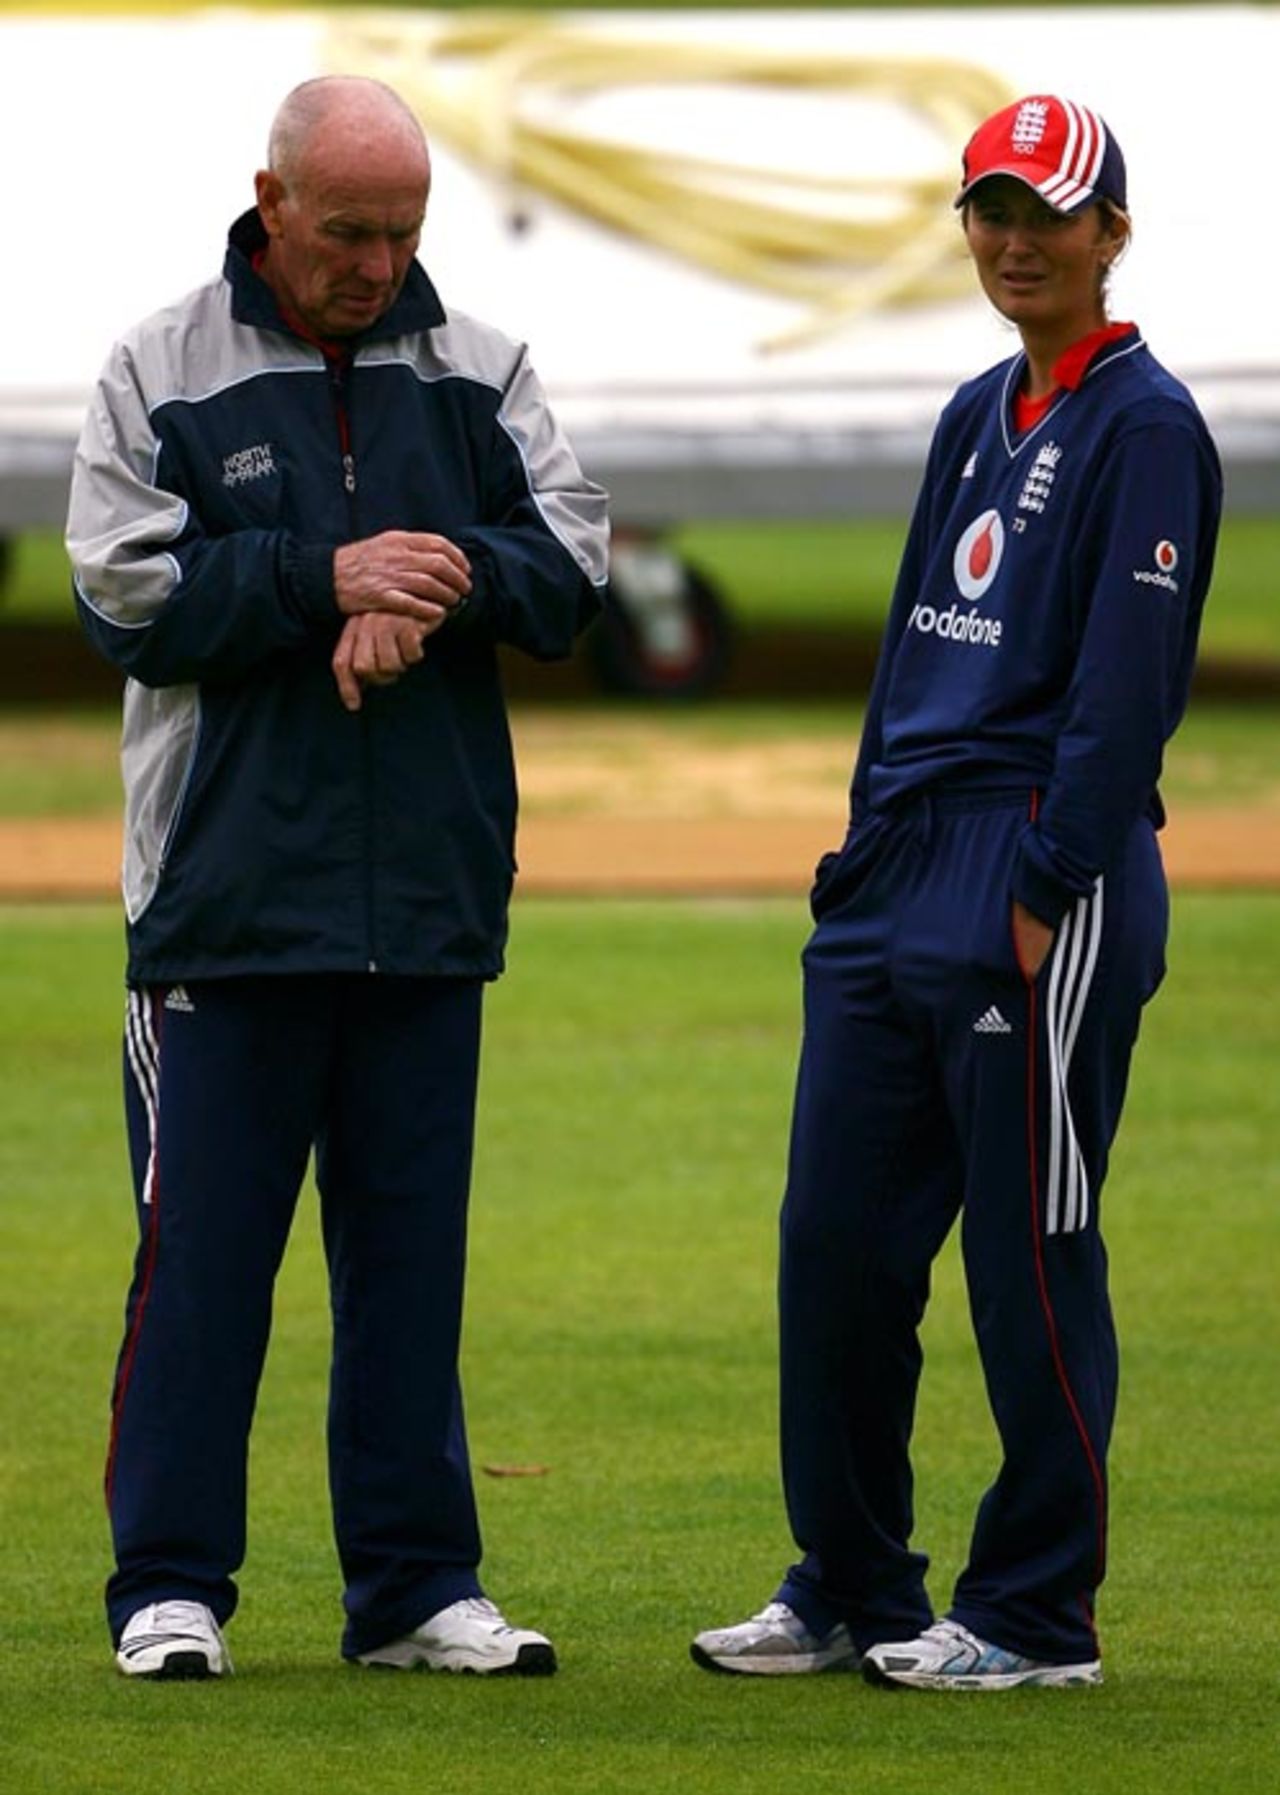 Jack Birkenshaw and Charlotte Edwards inspect the conditions, England v India, 4th women's ODI, Arundel, September 7, 2008